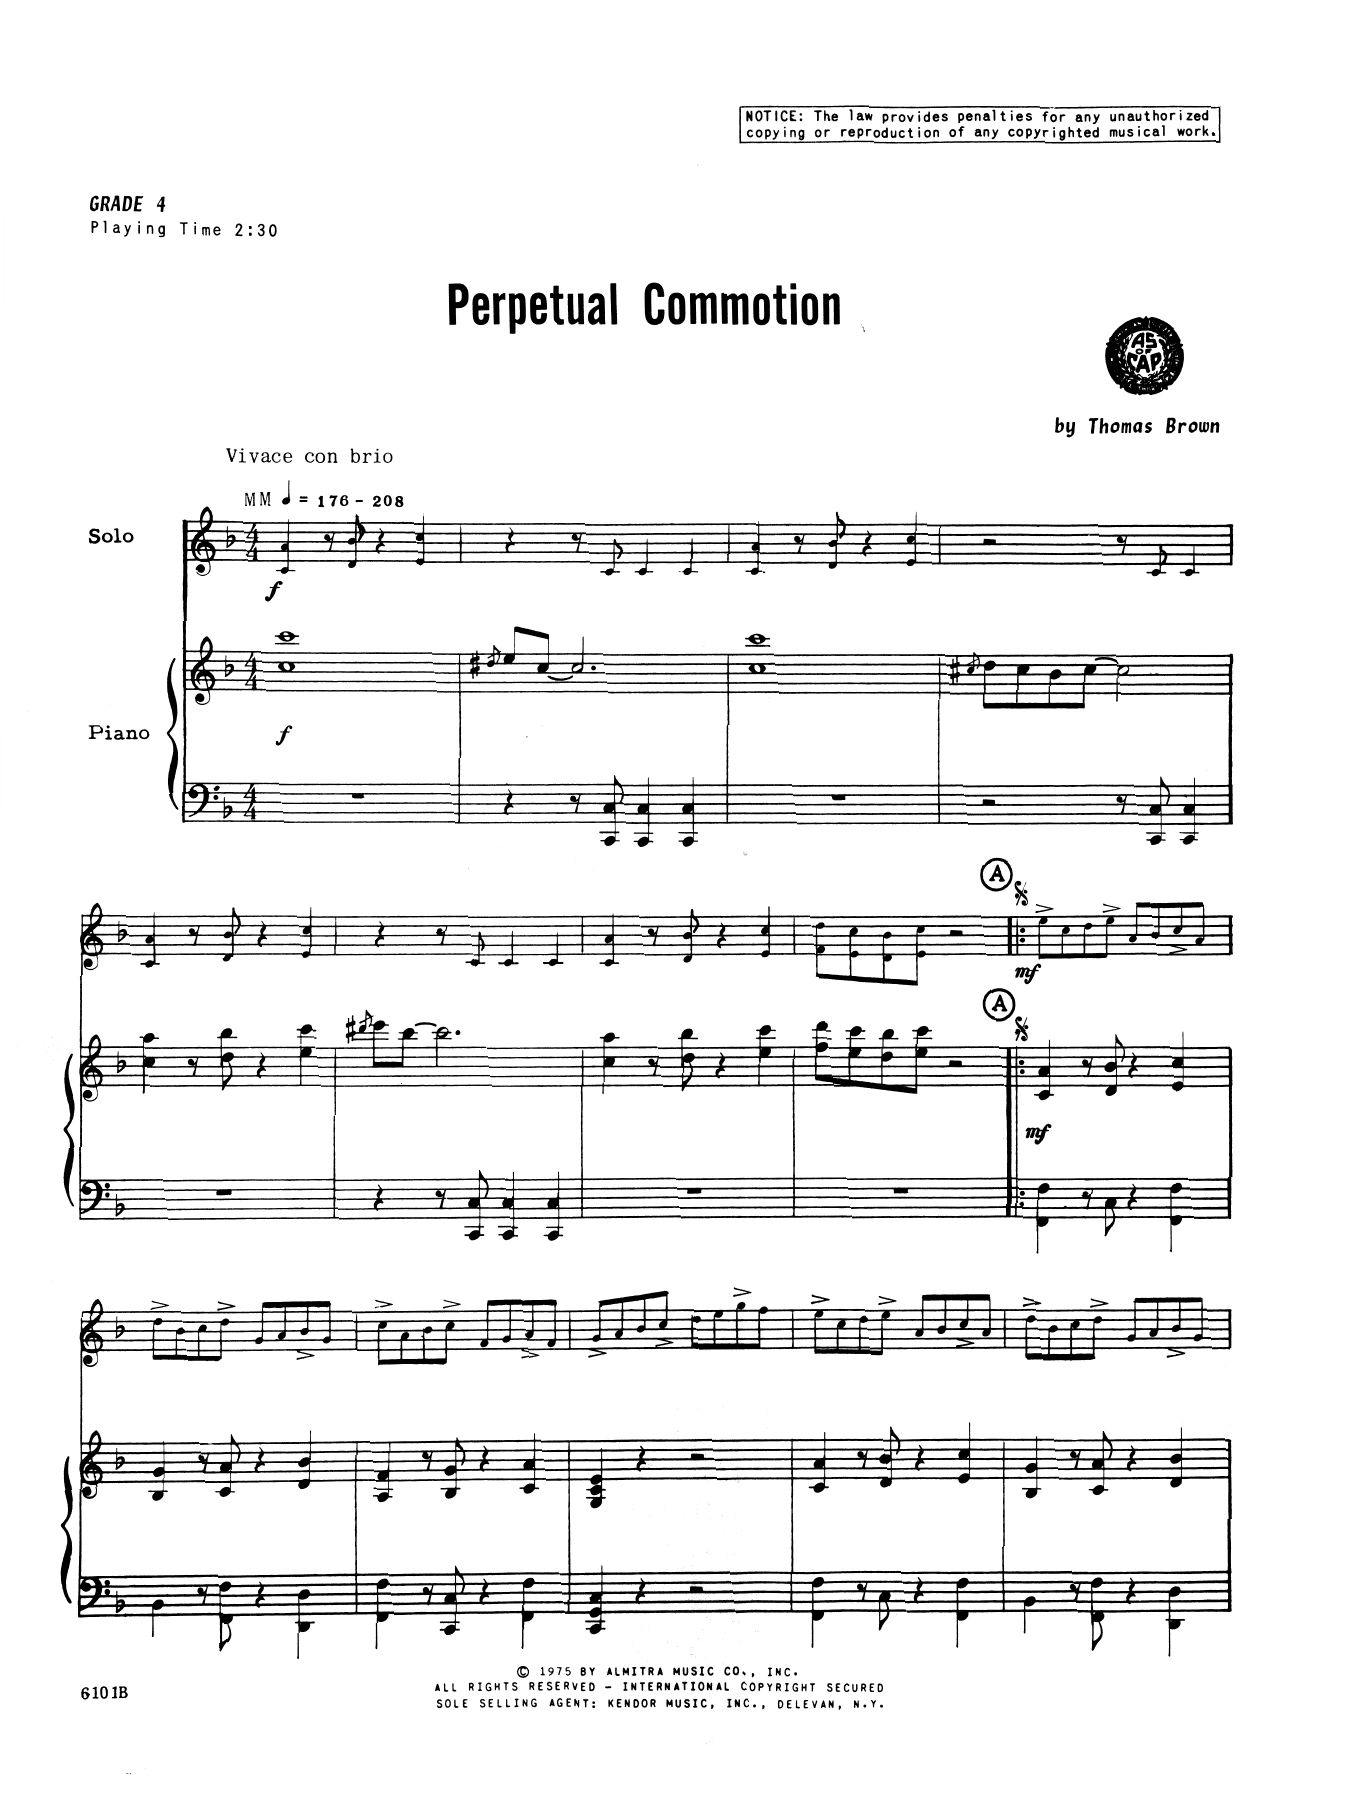 Download Tom Brown Perpetual Commotion - Piano Sheet Music